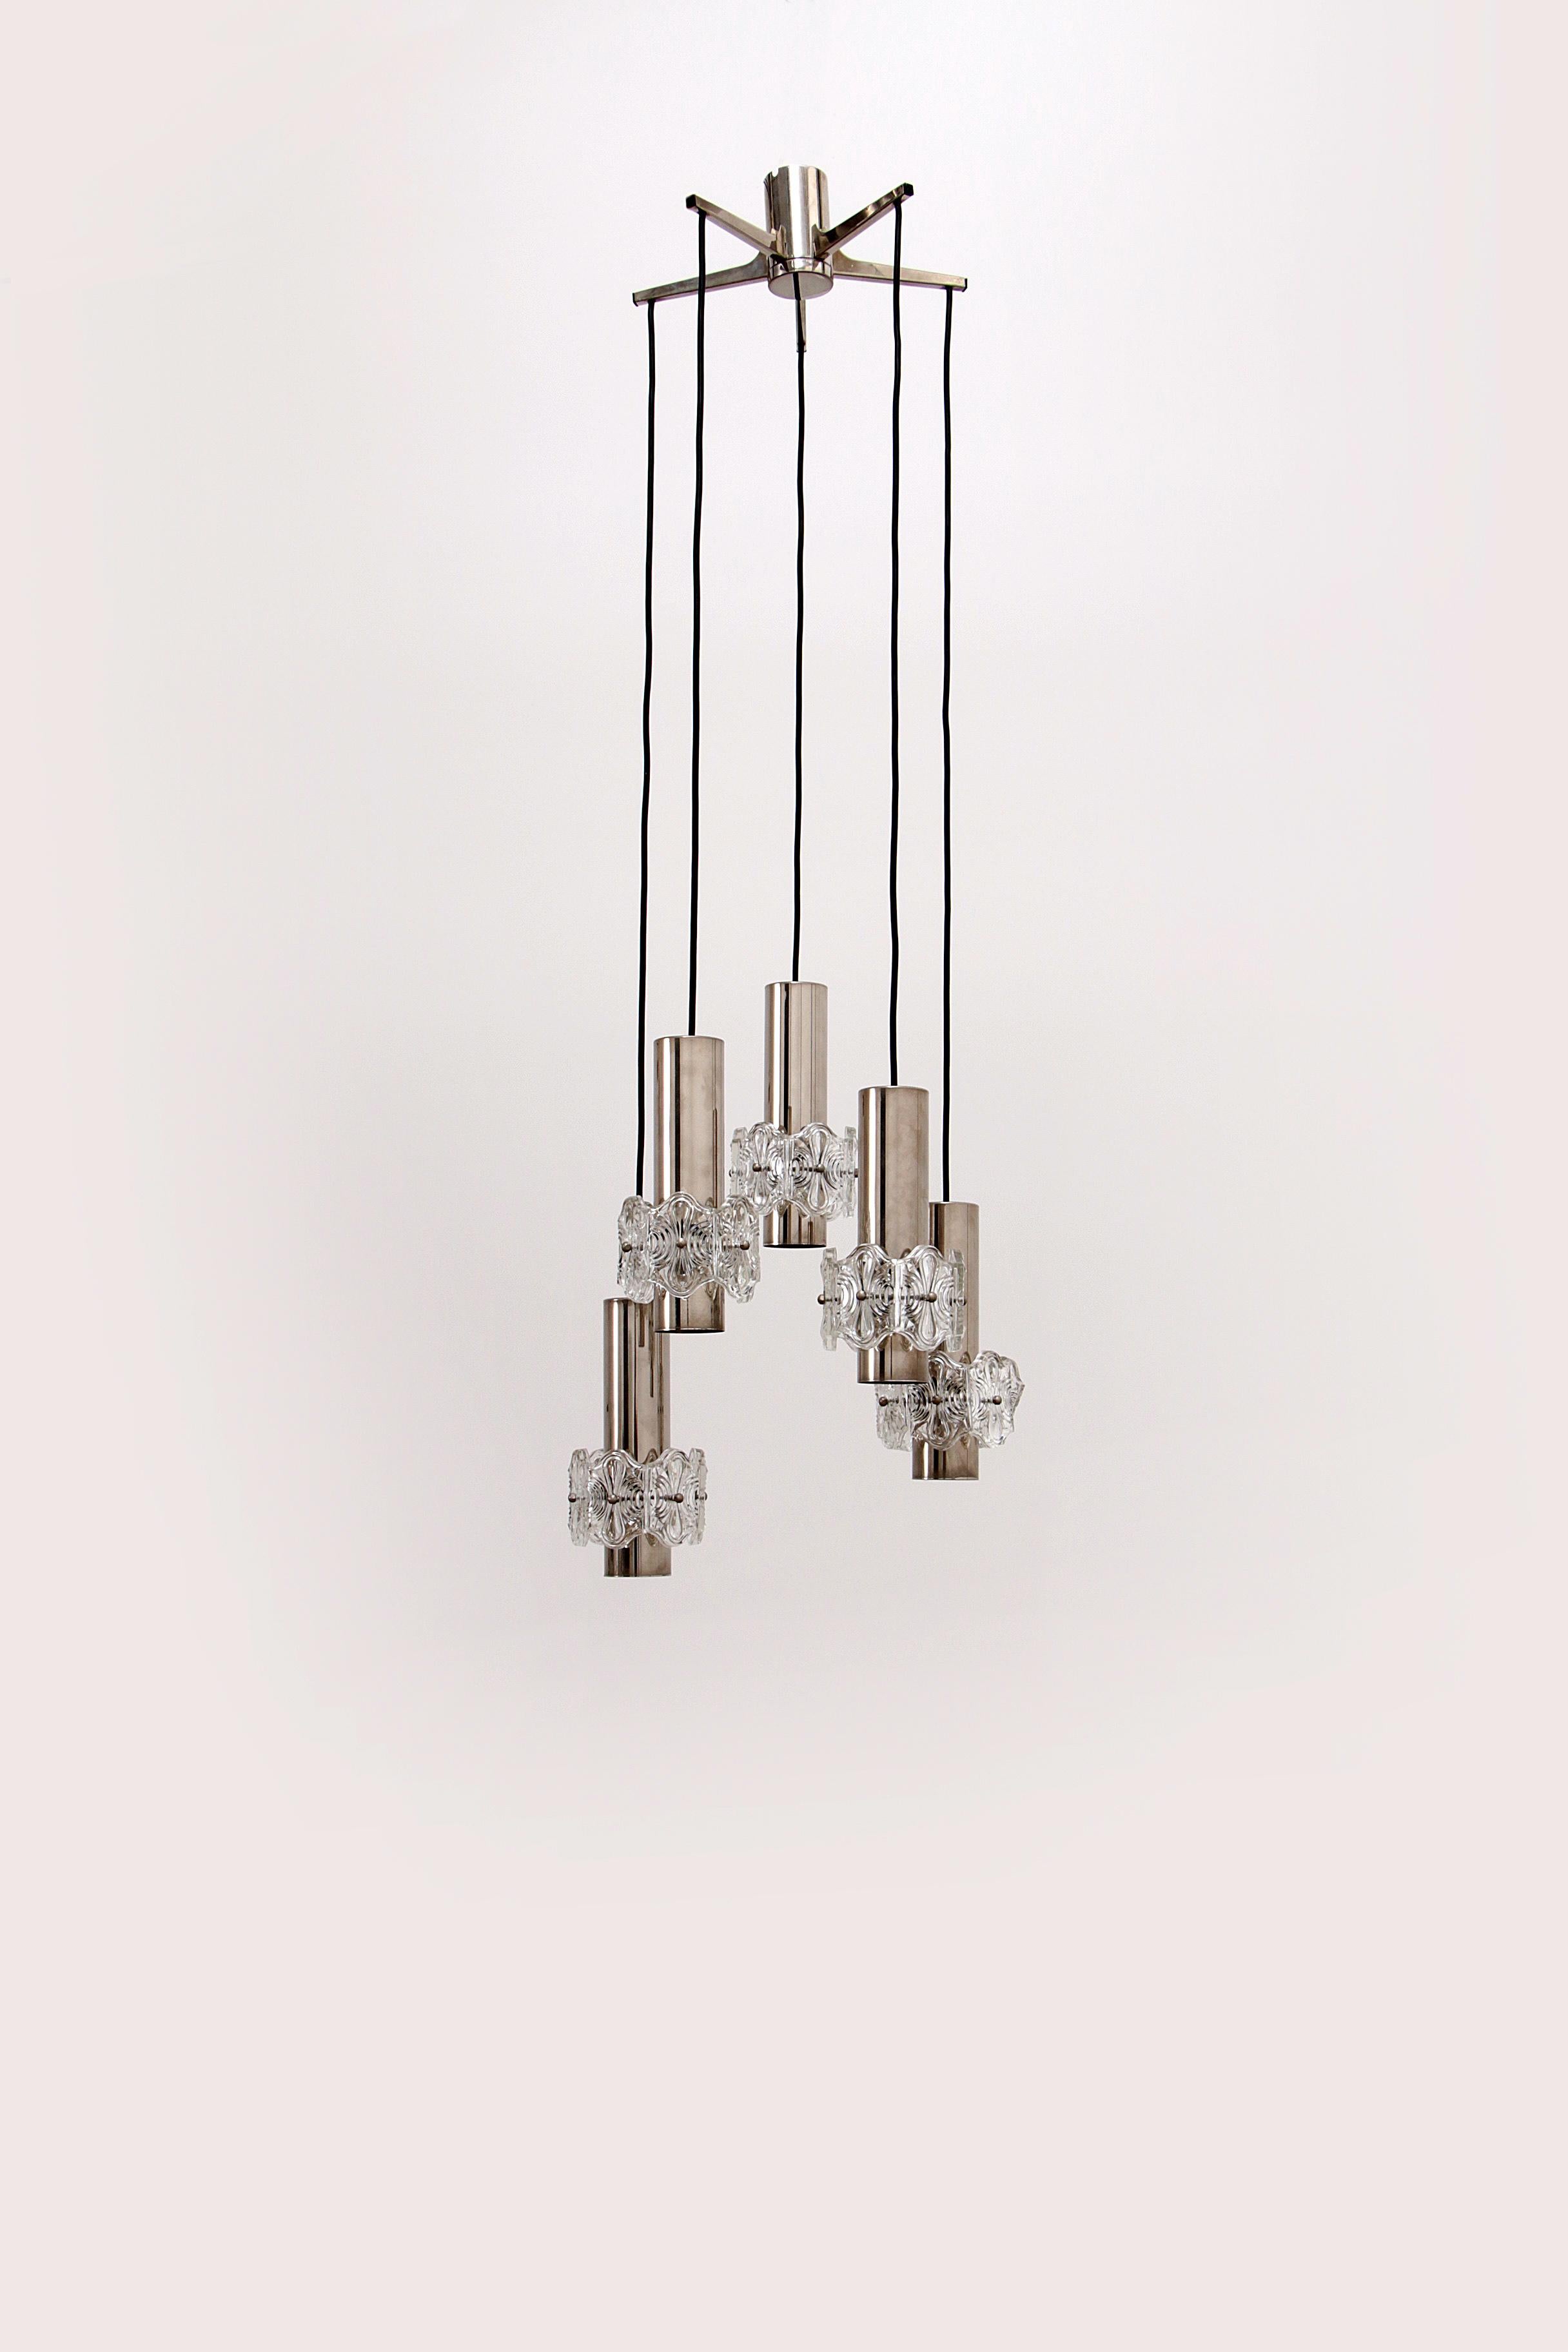 This is a hanging lamp with 5 lamps distributed over a round ceiling pendant. We have provided new cabling according to today's modern guidelines.

This lamp is designed in Germany and this lamp model is called cascade. The design is typical